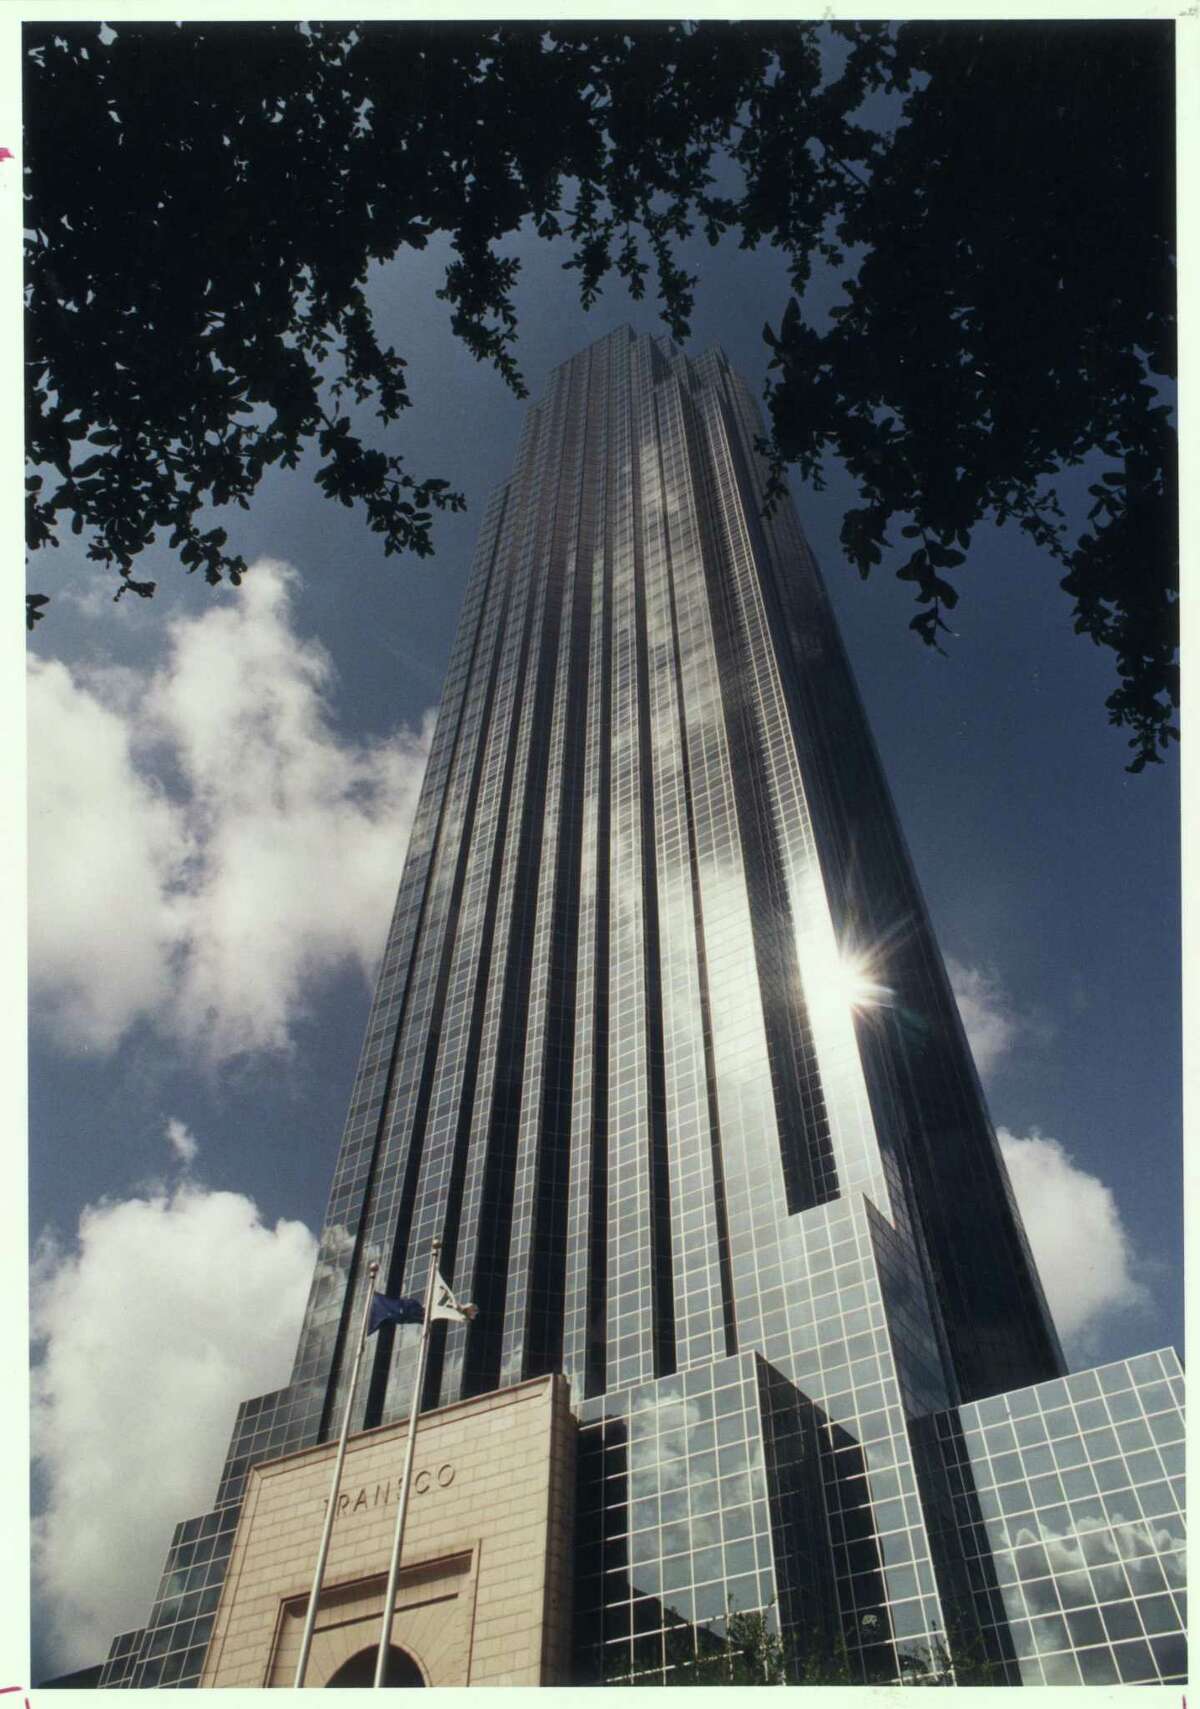 For the 64-story Williams Tower (originally Transco Tower), Johnson turned to New York’s prewar architecture for inspiration. It’s sheathed in reflective glass and has a monumental granite entry.